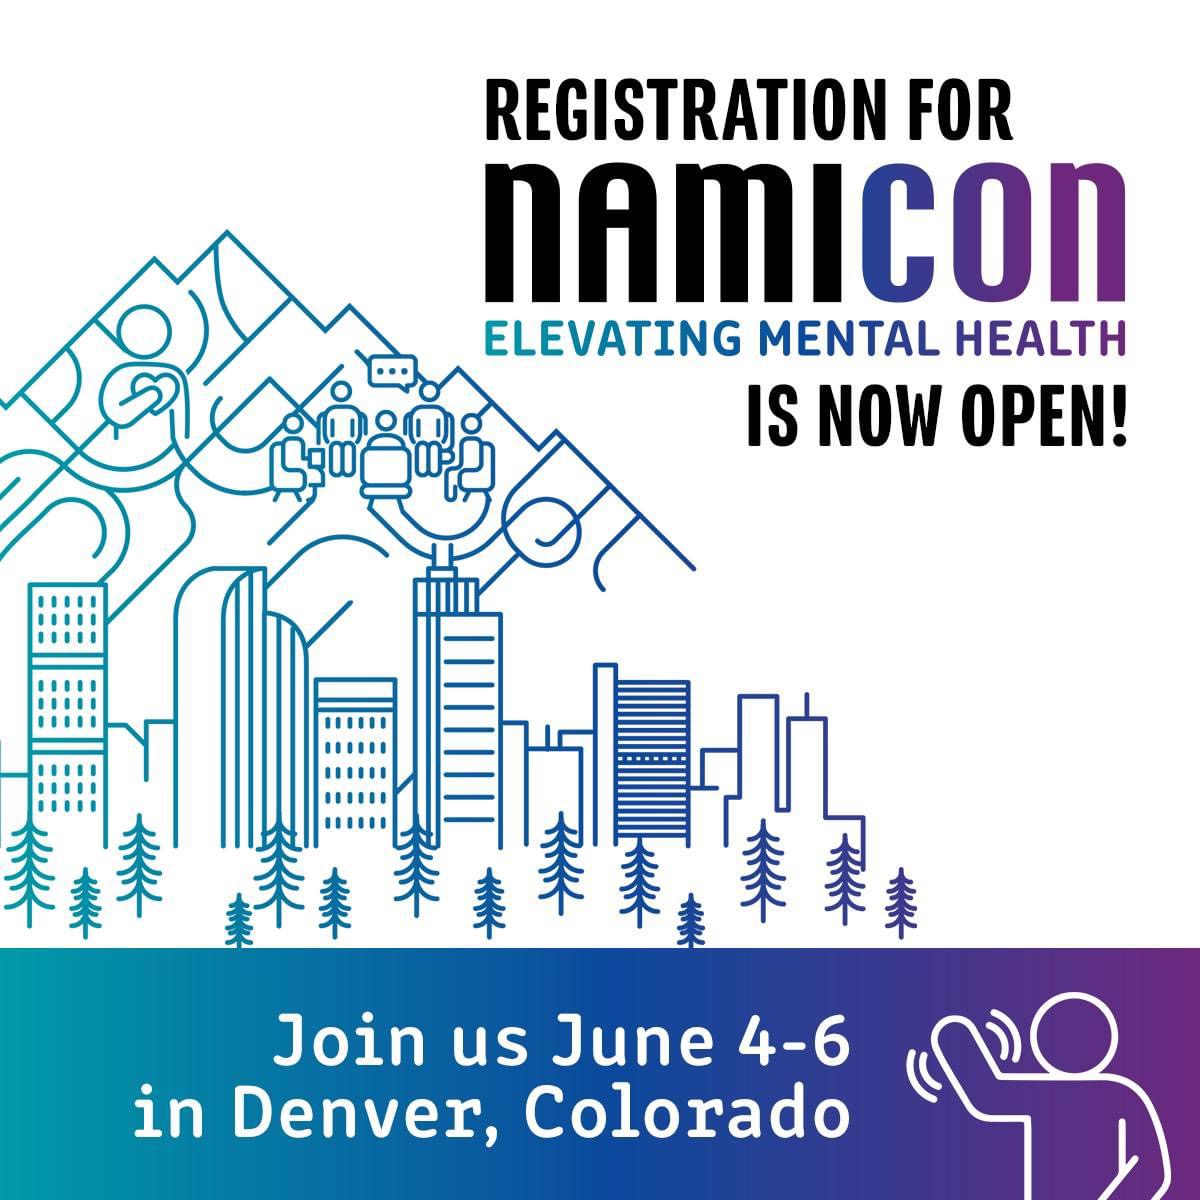 Don’t miss your chance to register for NAMICon 2024 - where you’ll be able to join hundreds of passionate and vibrant voices from around the world to elevate mental health! 
-
Register Now: 
convention.nami.org

#Together4MH #gapol